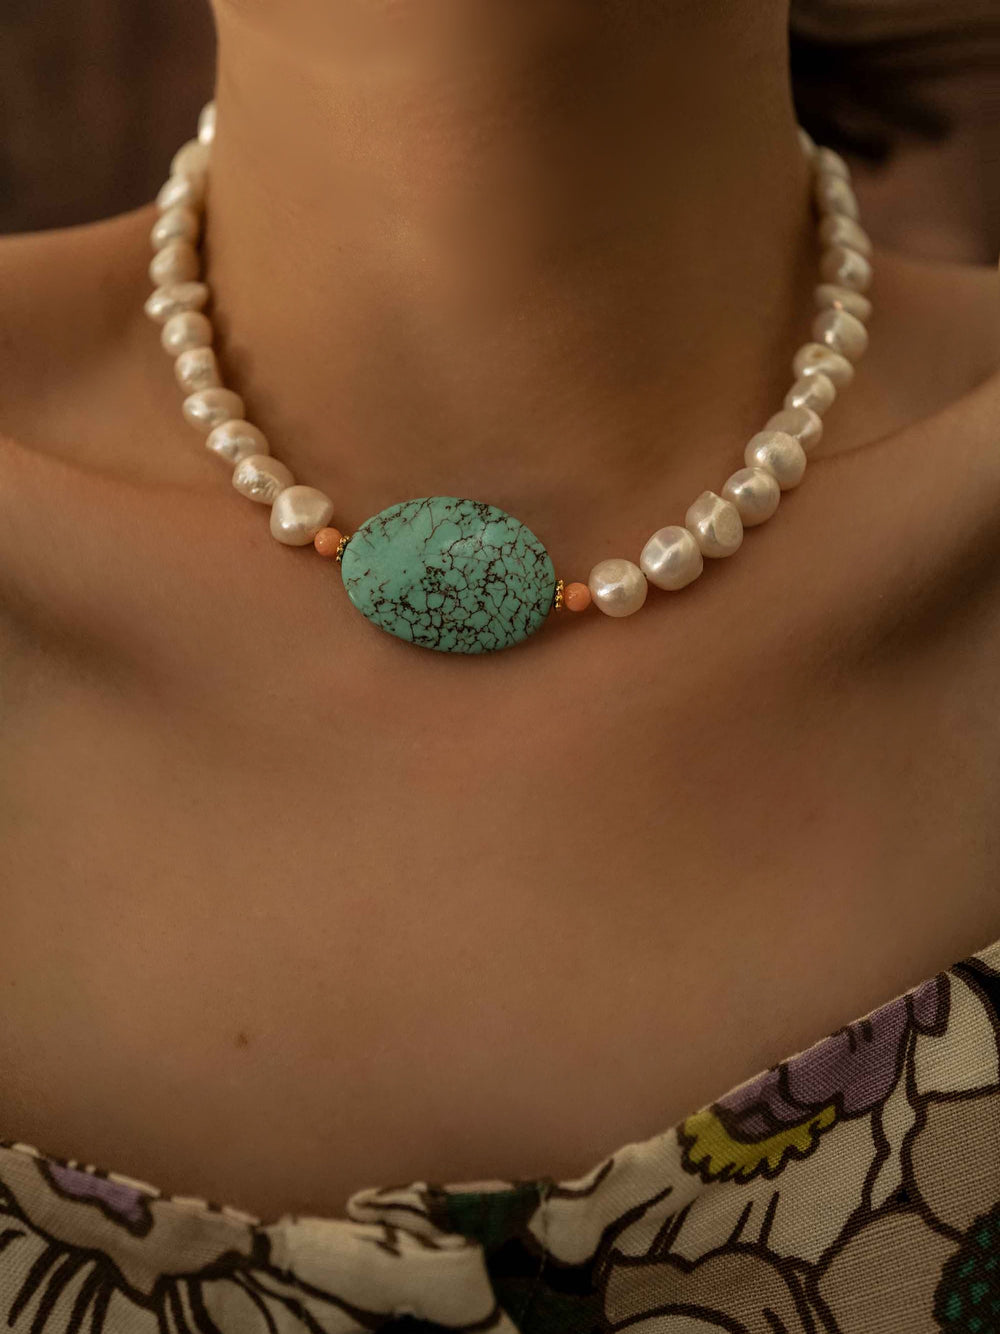 a model wear A necklace of natural stones and pearls